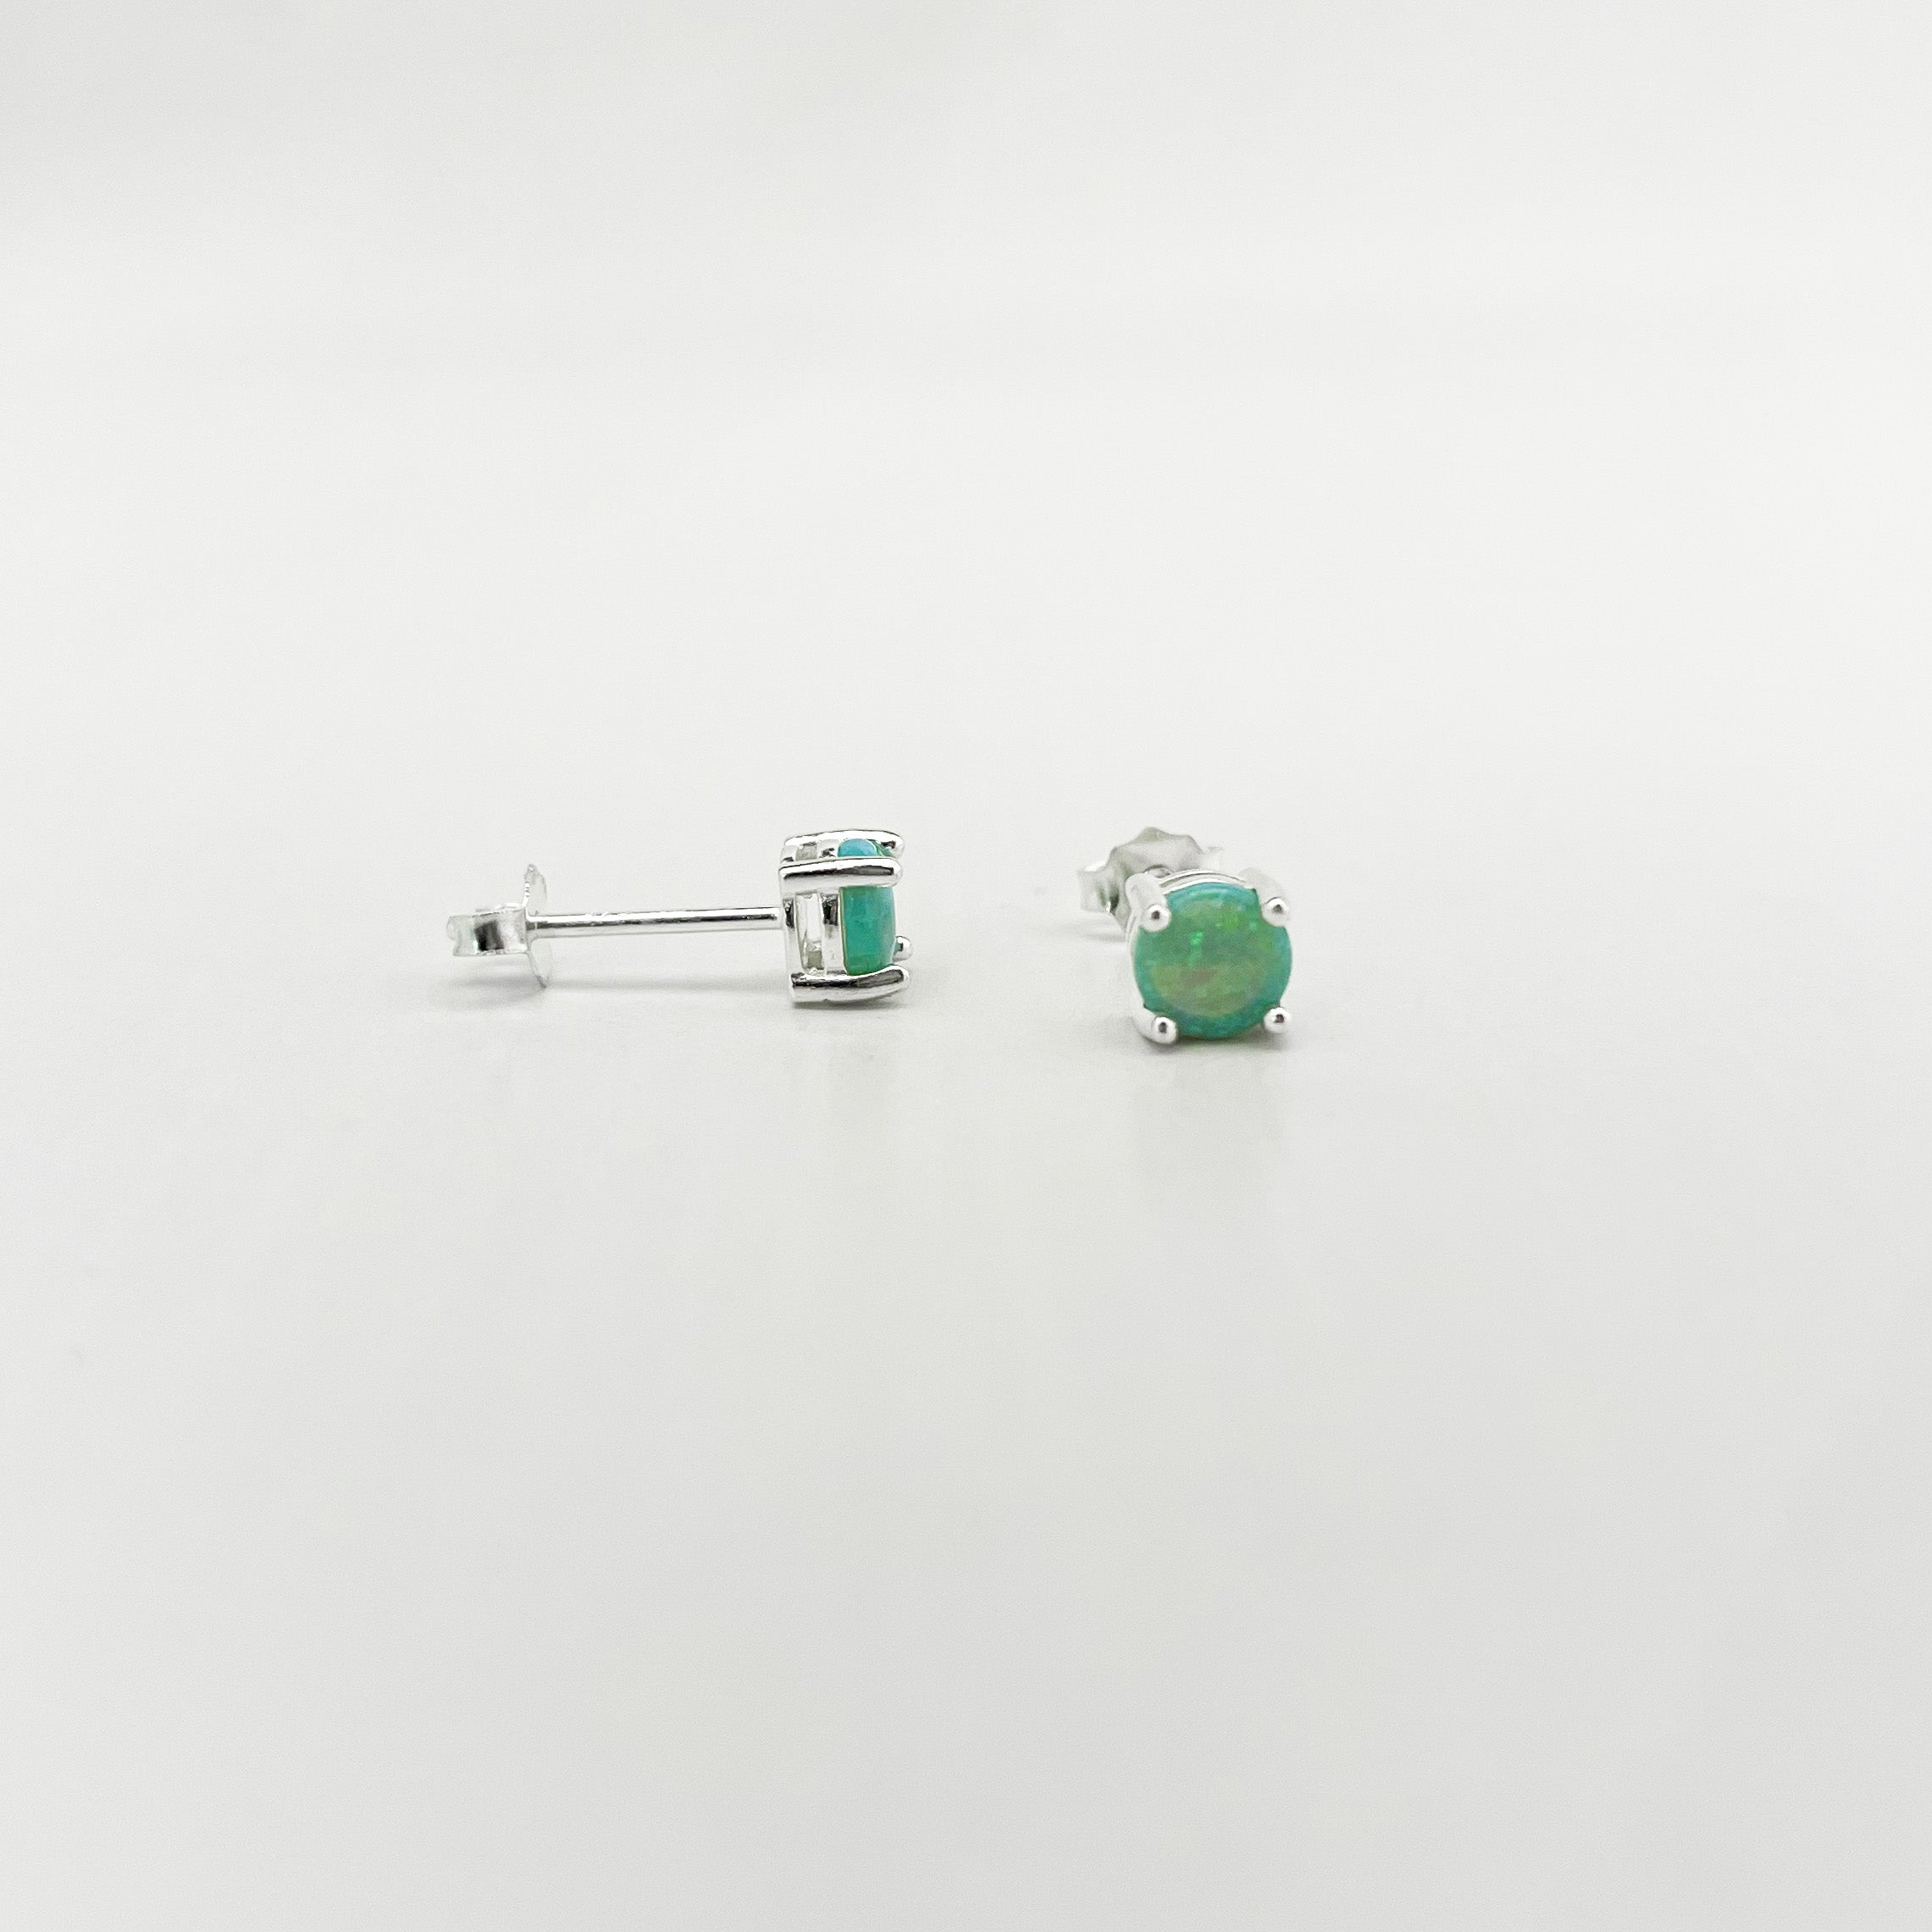 SYNTHETIC OPAL STUD WITH PRONGS Green Opal